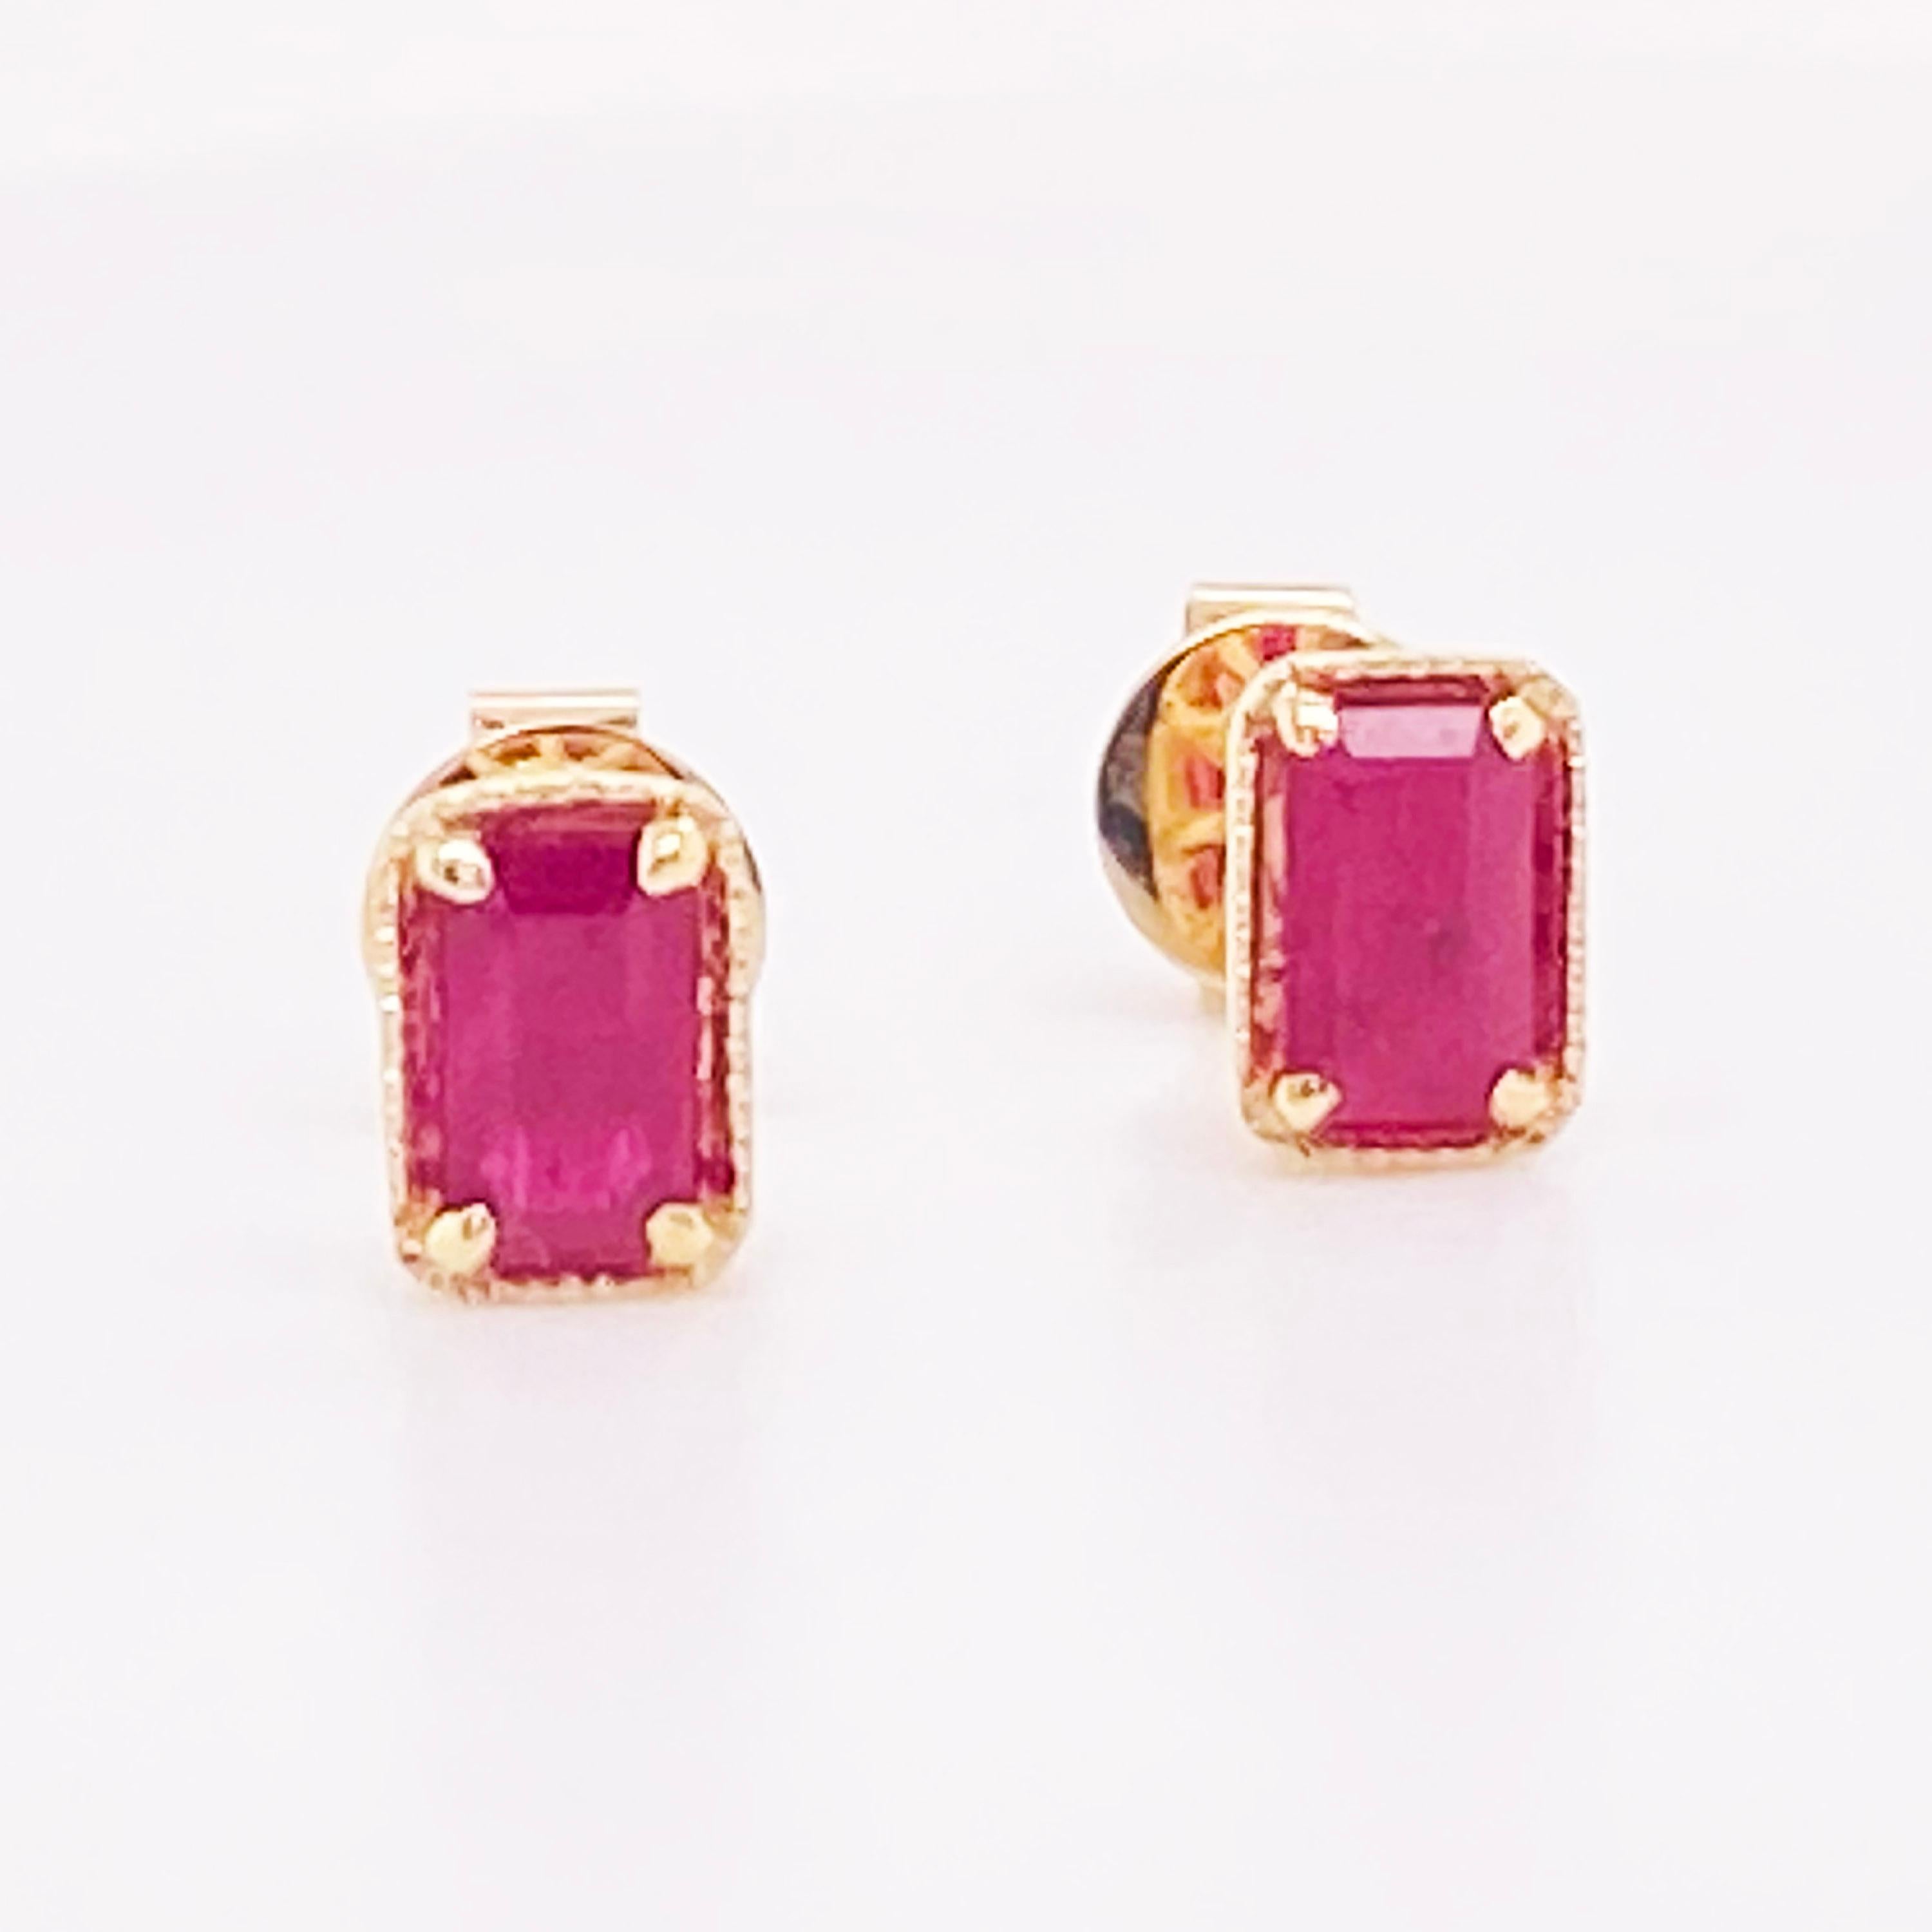 Geometric Ruby Earrings 14K Gold .55 Carat Emerald Cut Ruby in Stud Style, July In New Condition For Sale In Austin, TX